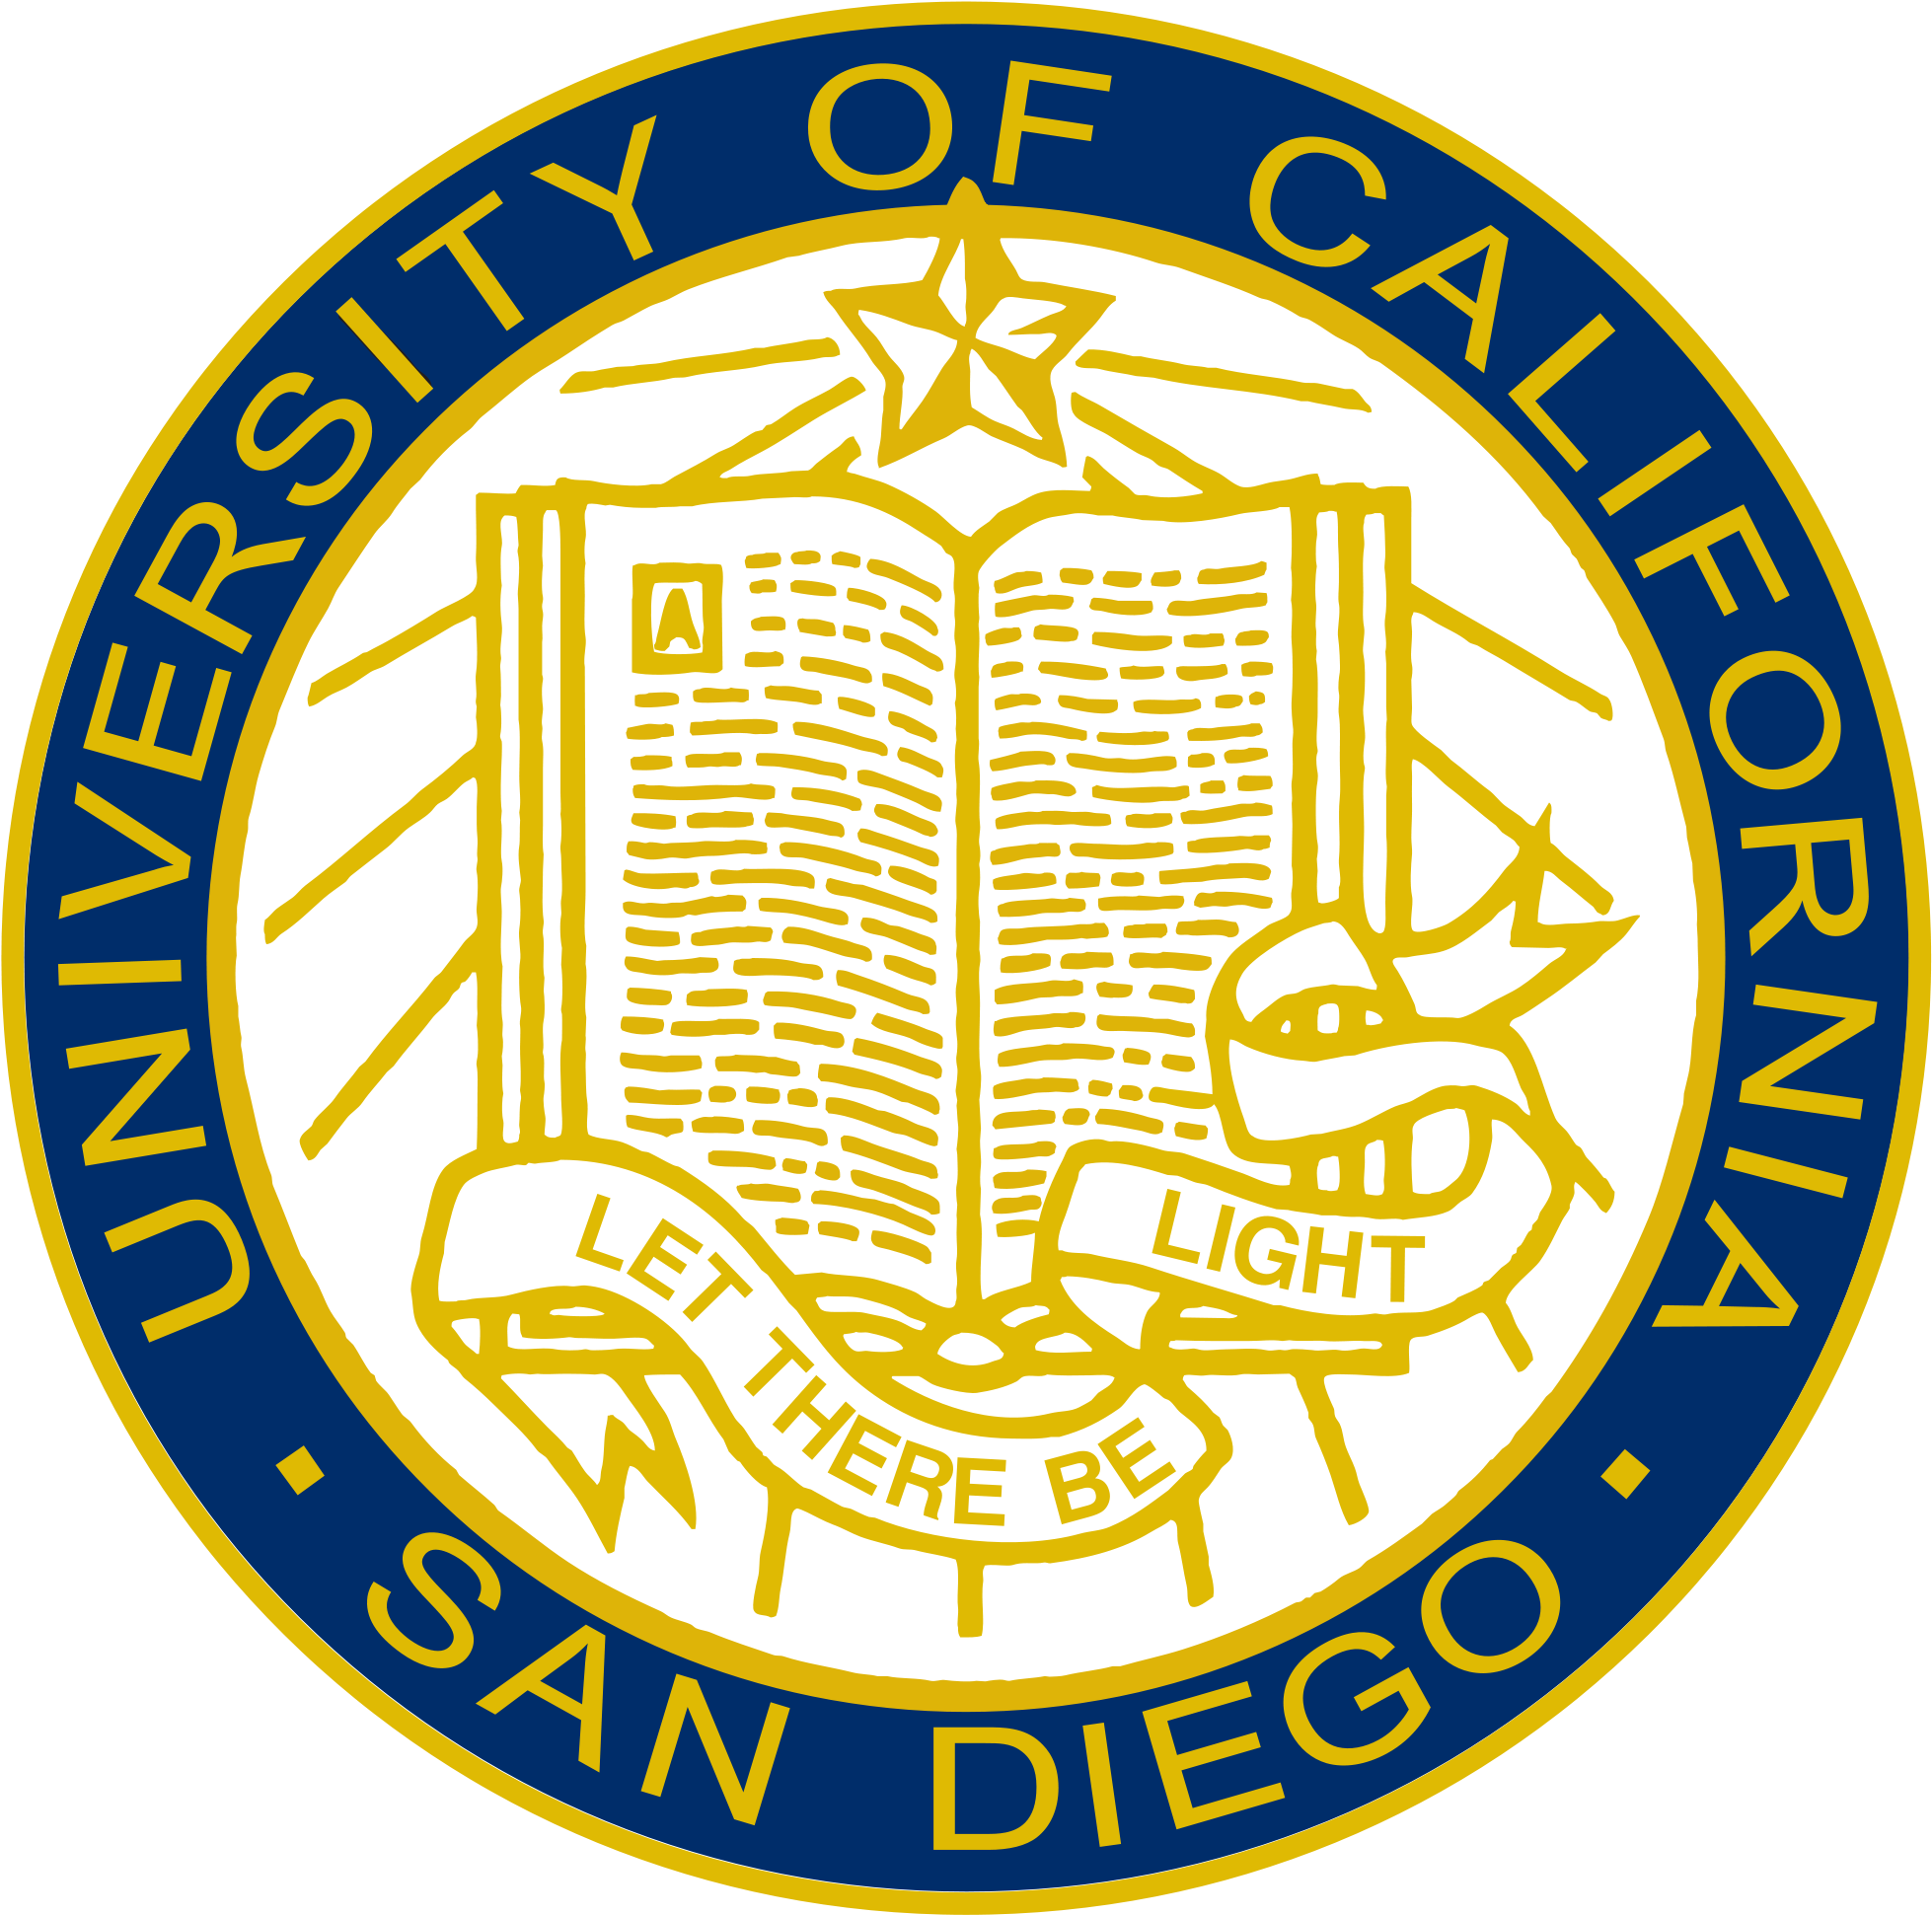 Image Result For San Francisco State University - Uc San Diego Flag (2000x2000)